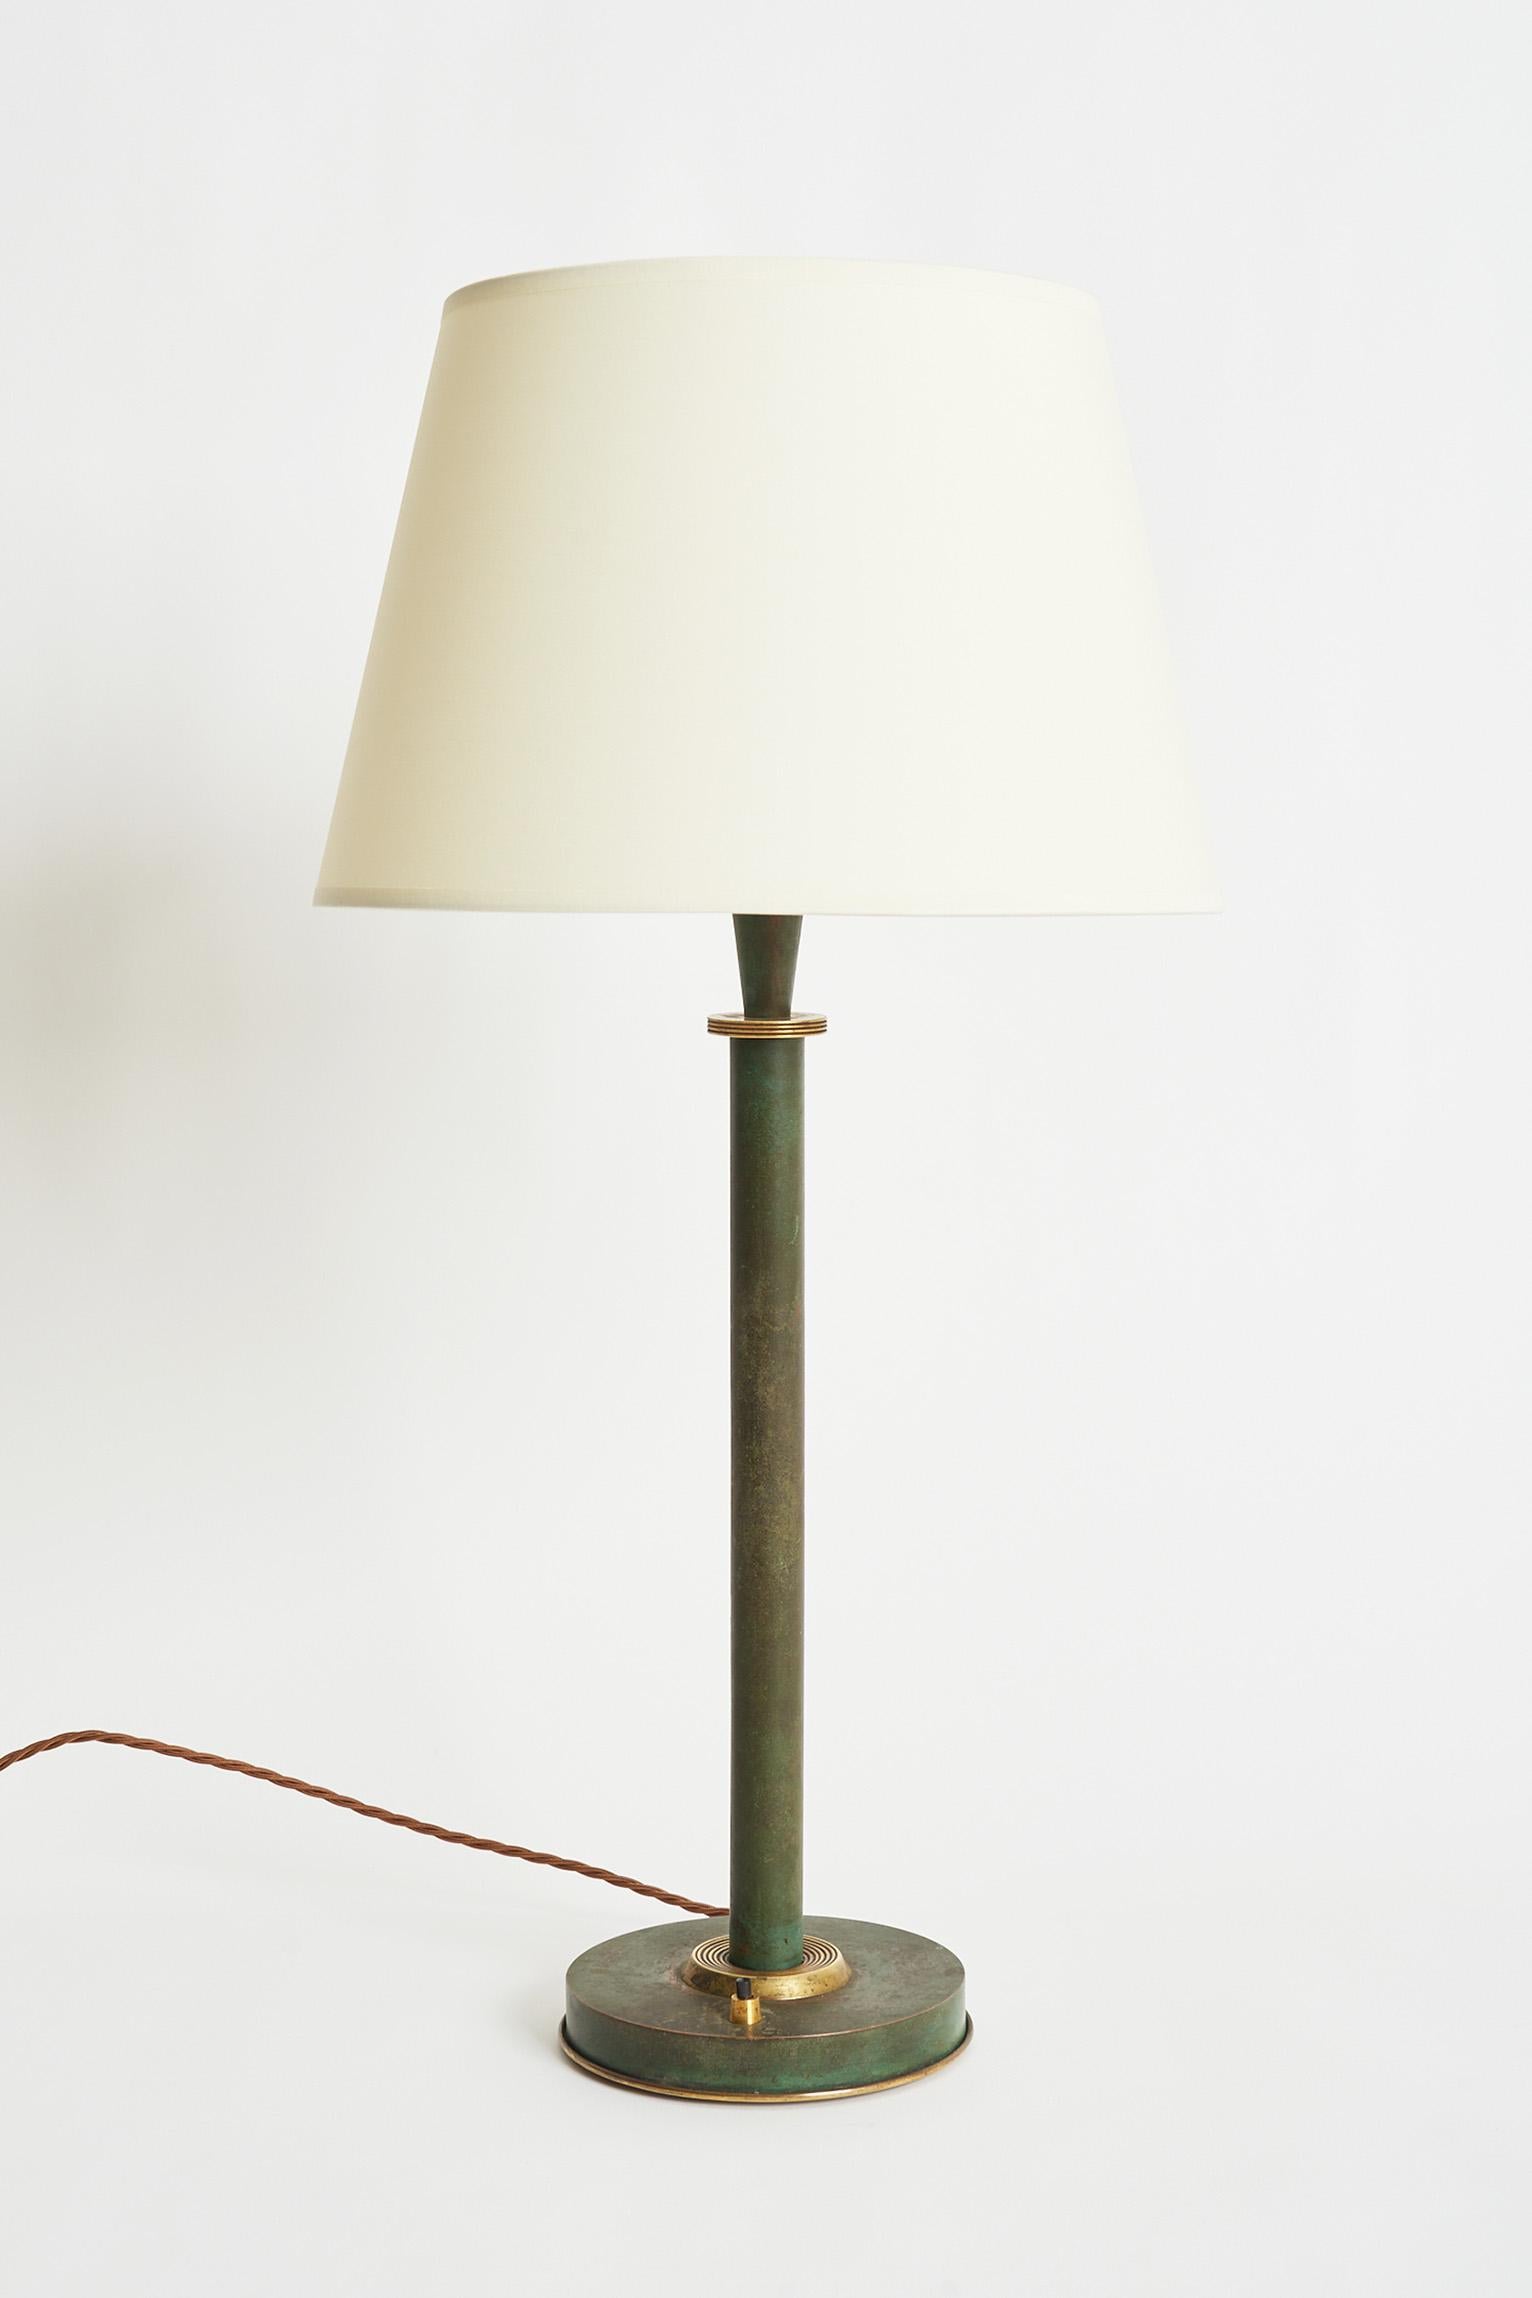 A brass mounted green patinated brass table lamp.
France, Circa 1940.
Withteh shade: 71 cm high by 35 cm diameter.
Lamp base only: 51 cm high by 17 cm diameter.